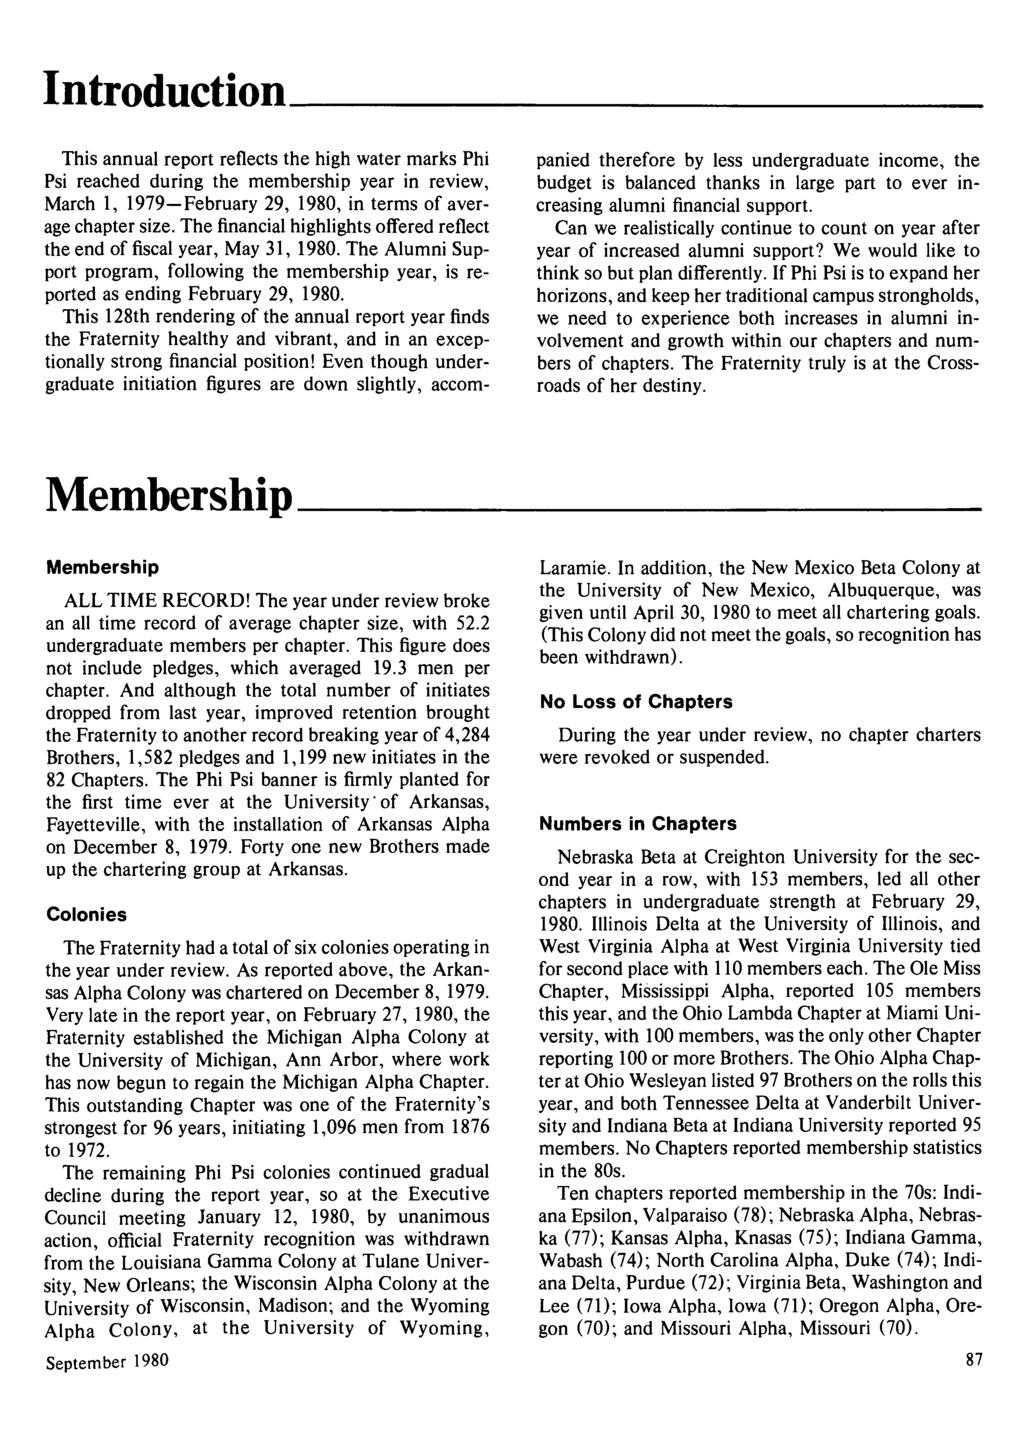 Introduction This annual report reflects the high water marks Phi Psi reached during the membership year in review, March 1, 1979 February 29, 1980, in terms of average chapter size.